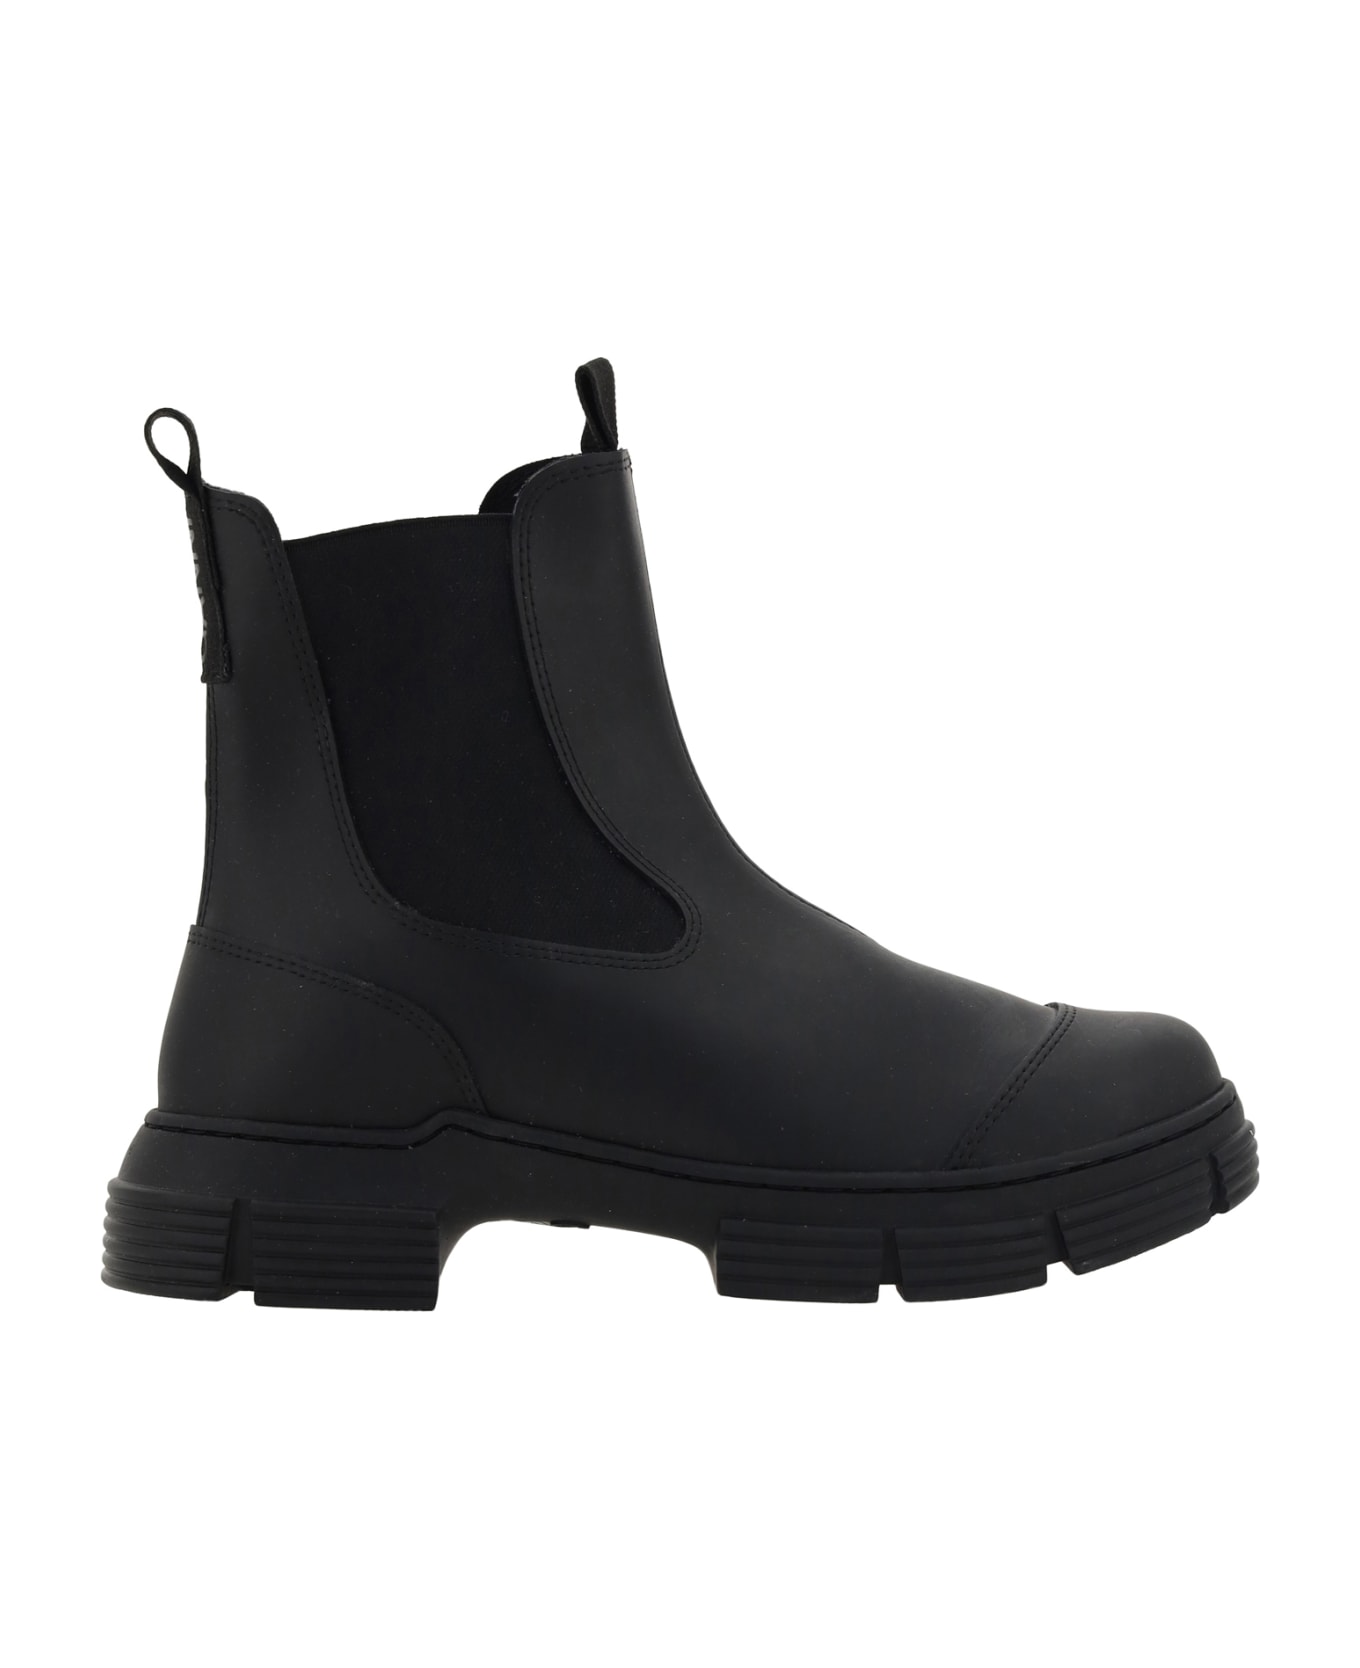 Ganni Rubber City Ankle Boots - Black ブーツ